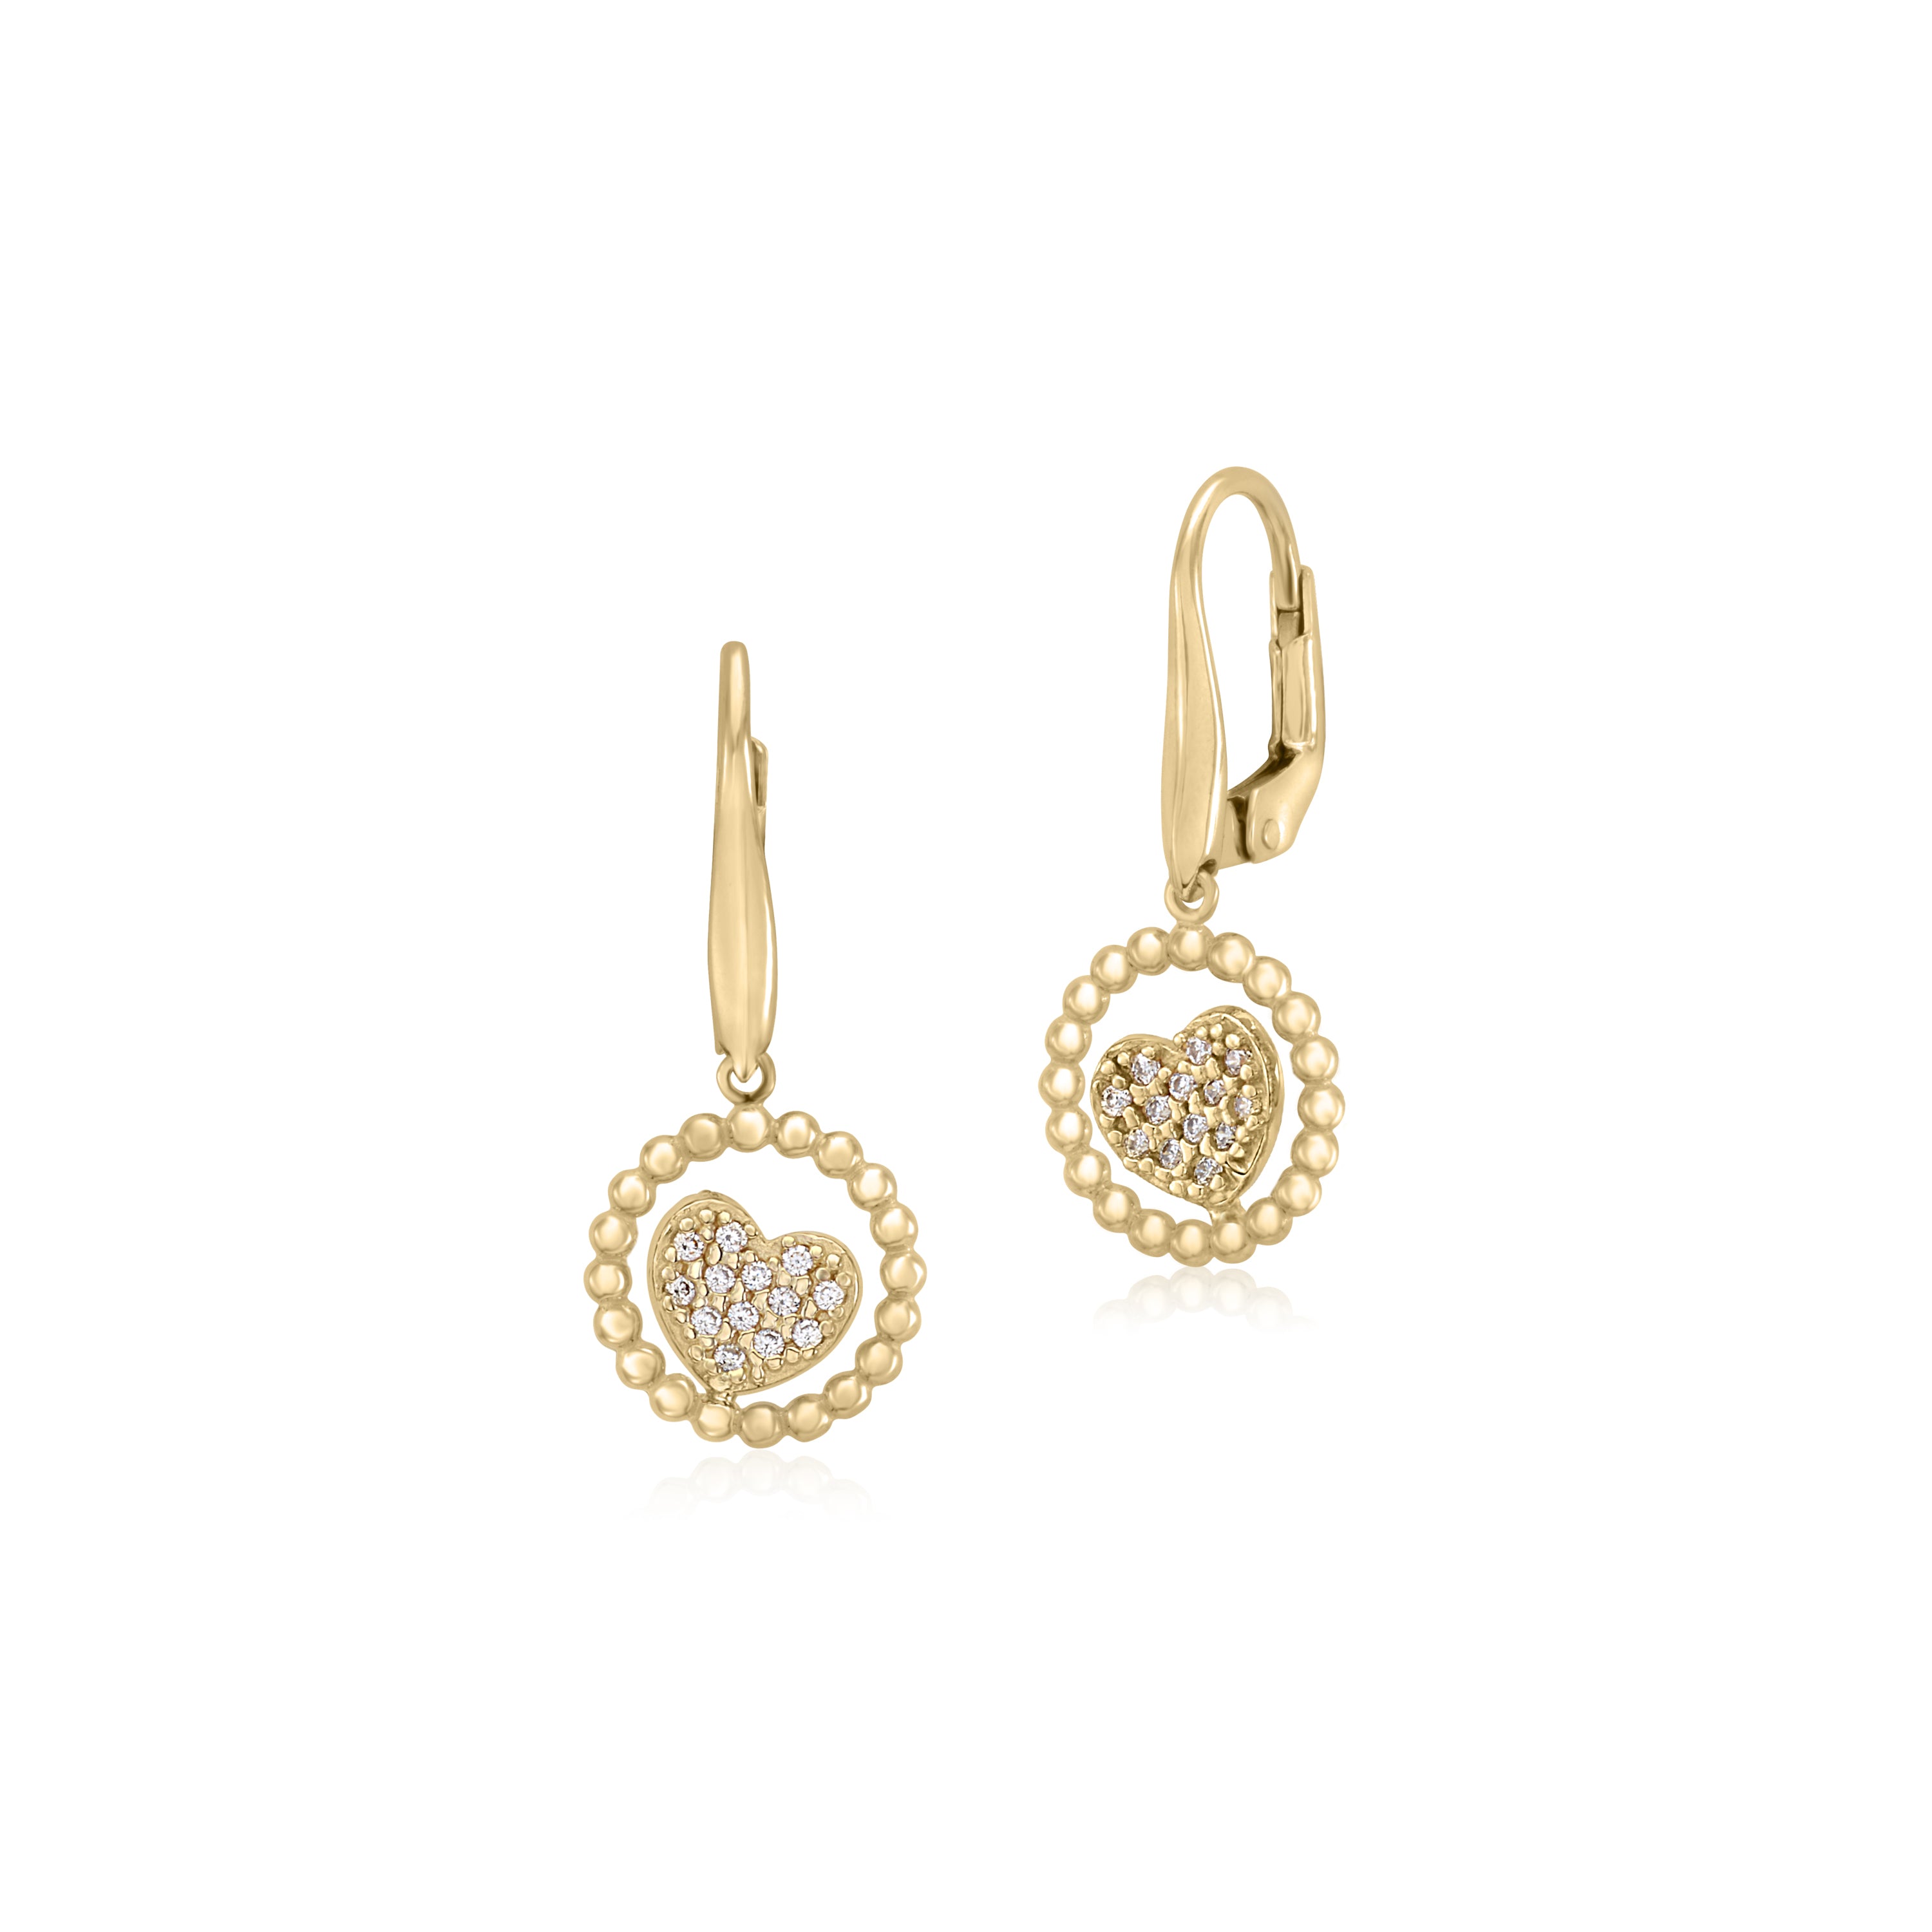 14K Yellow Gold Leverback Earrings Floating Heart Pave CZ in Open Beaded Circle